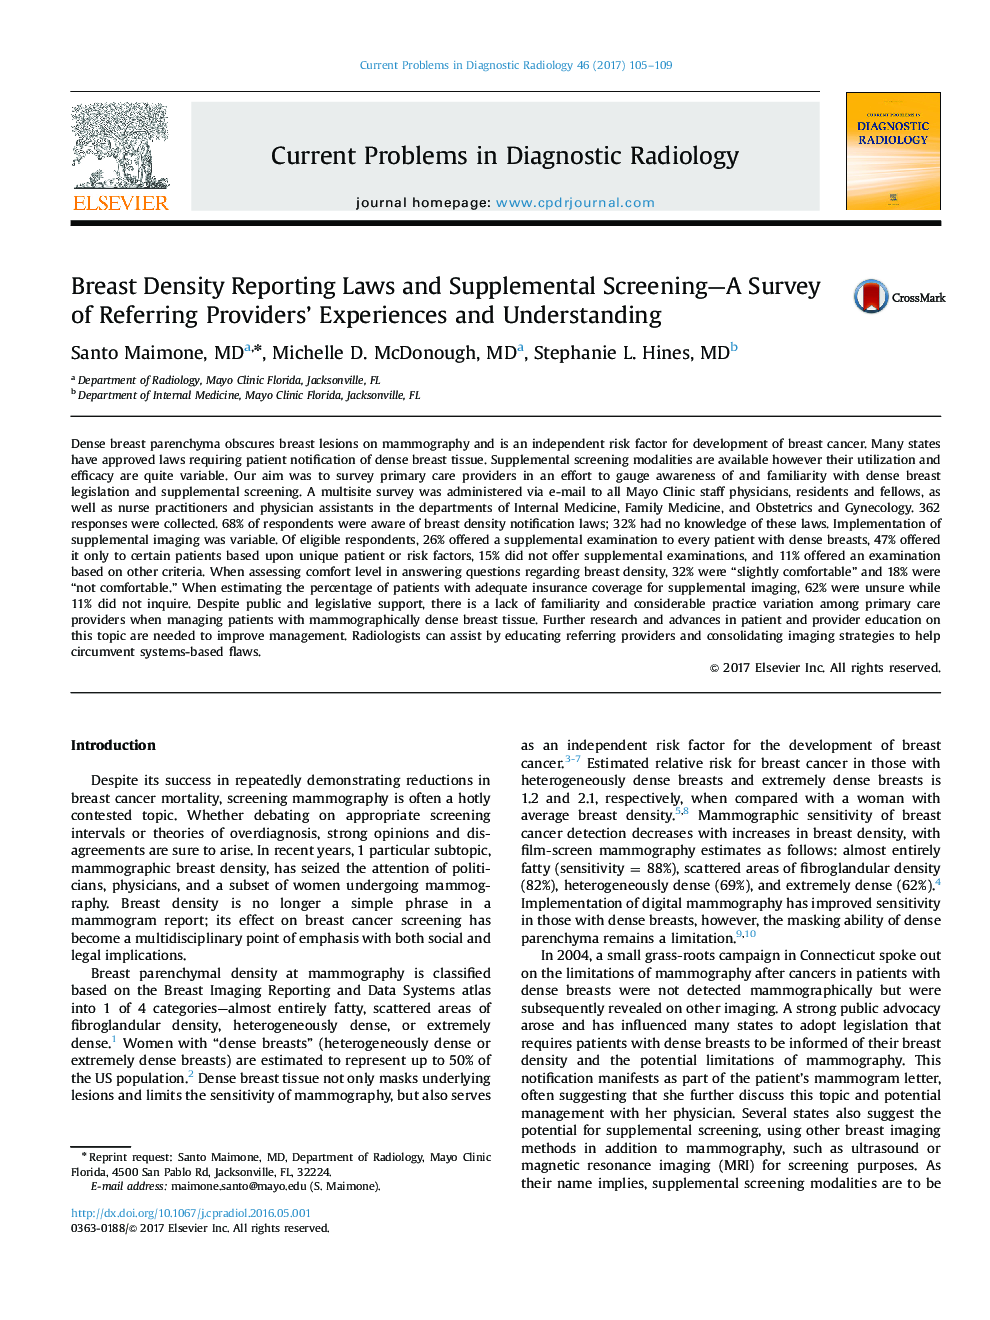 Breast Density Reporting Laws and Supplemental Screening-A Survey of Referring Providers' Experiences and Understanding